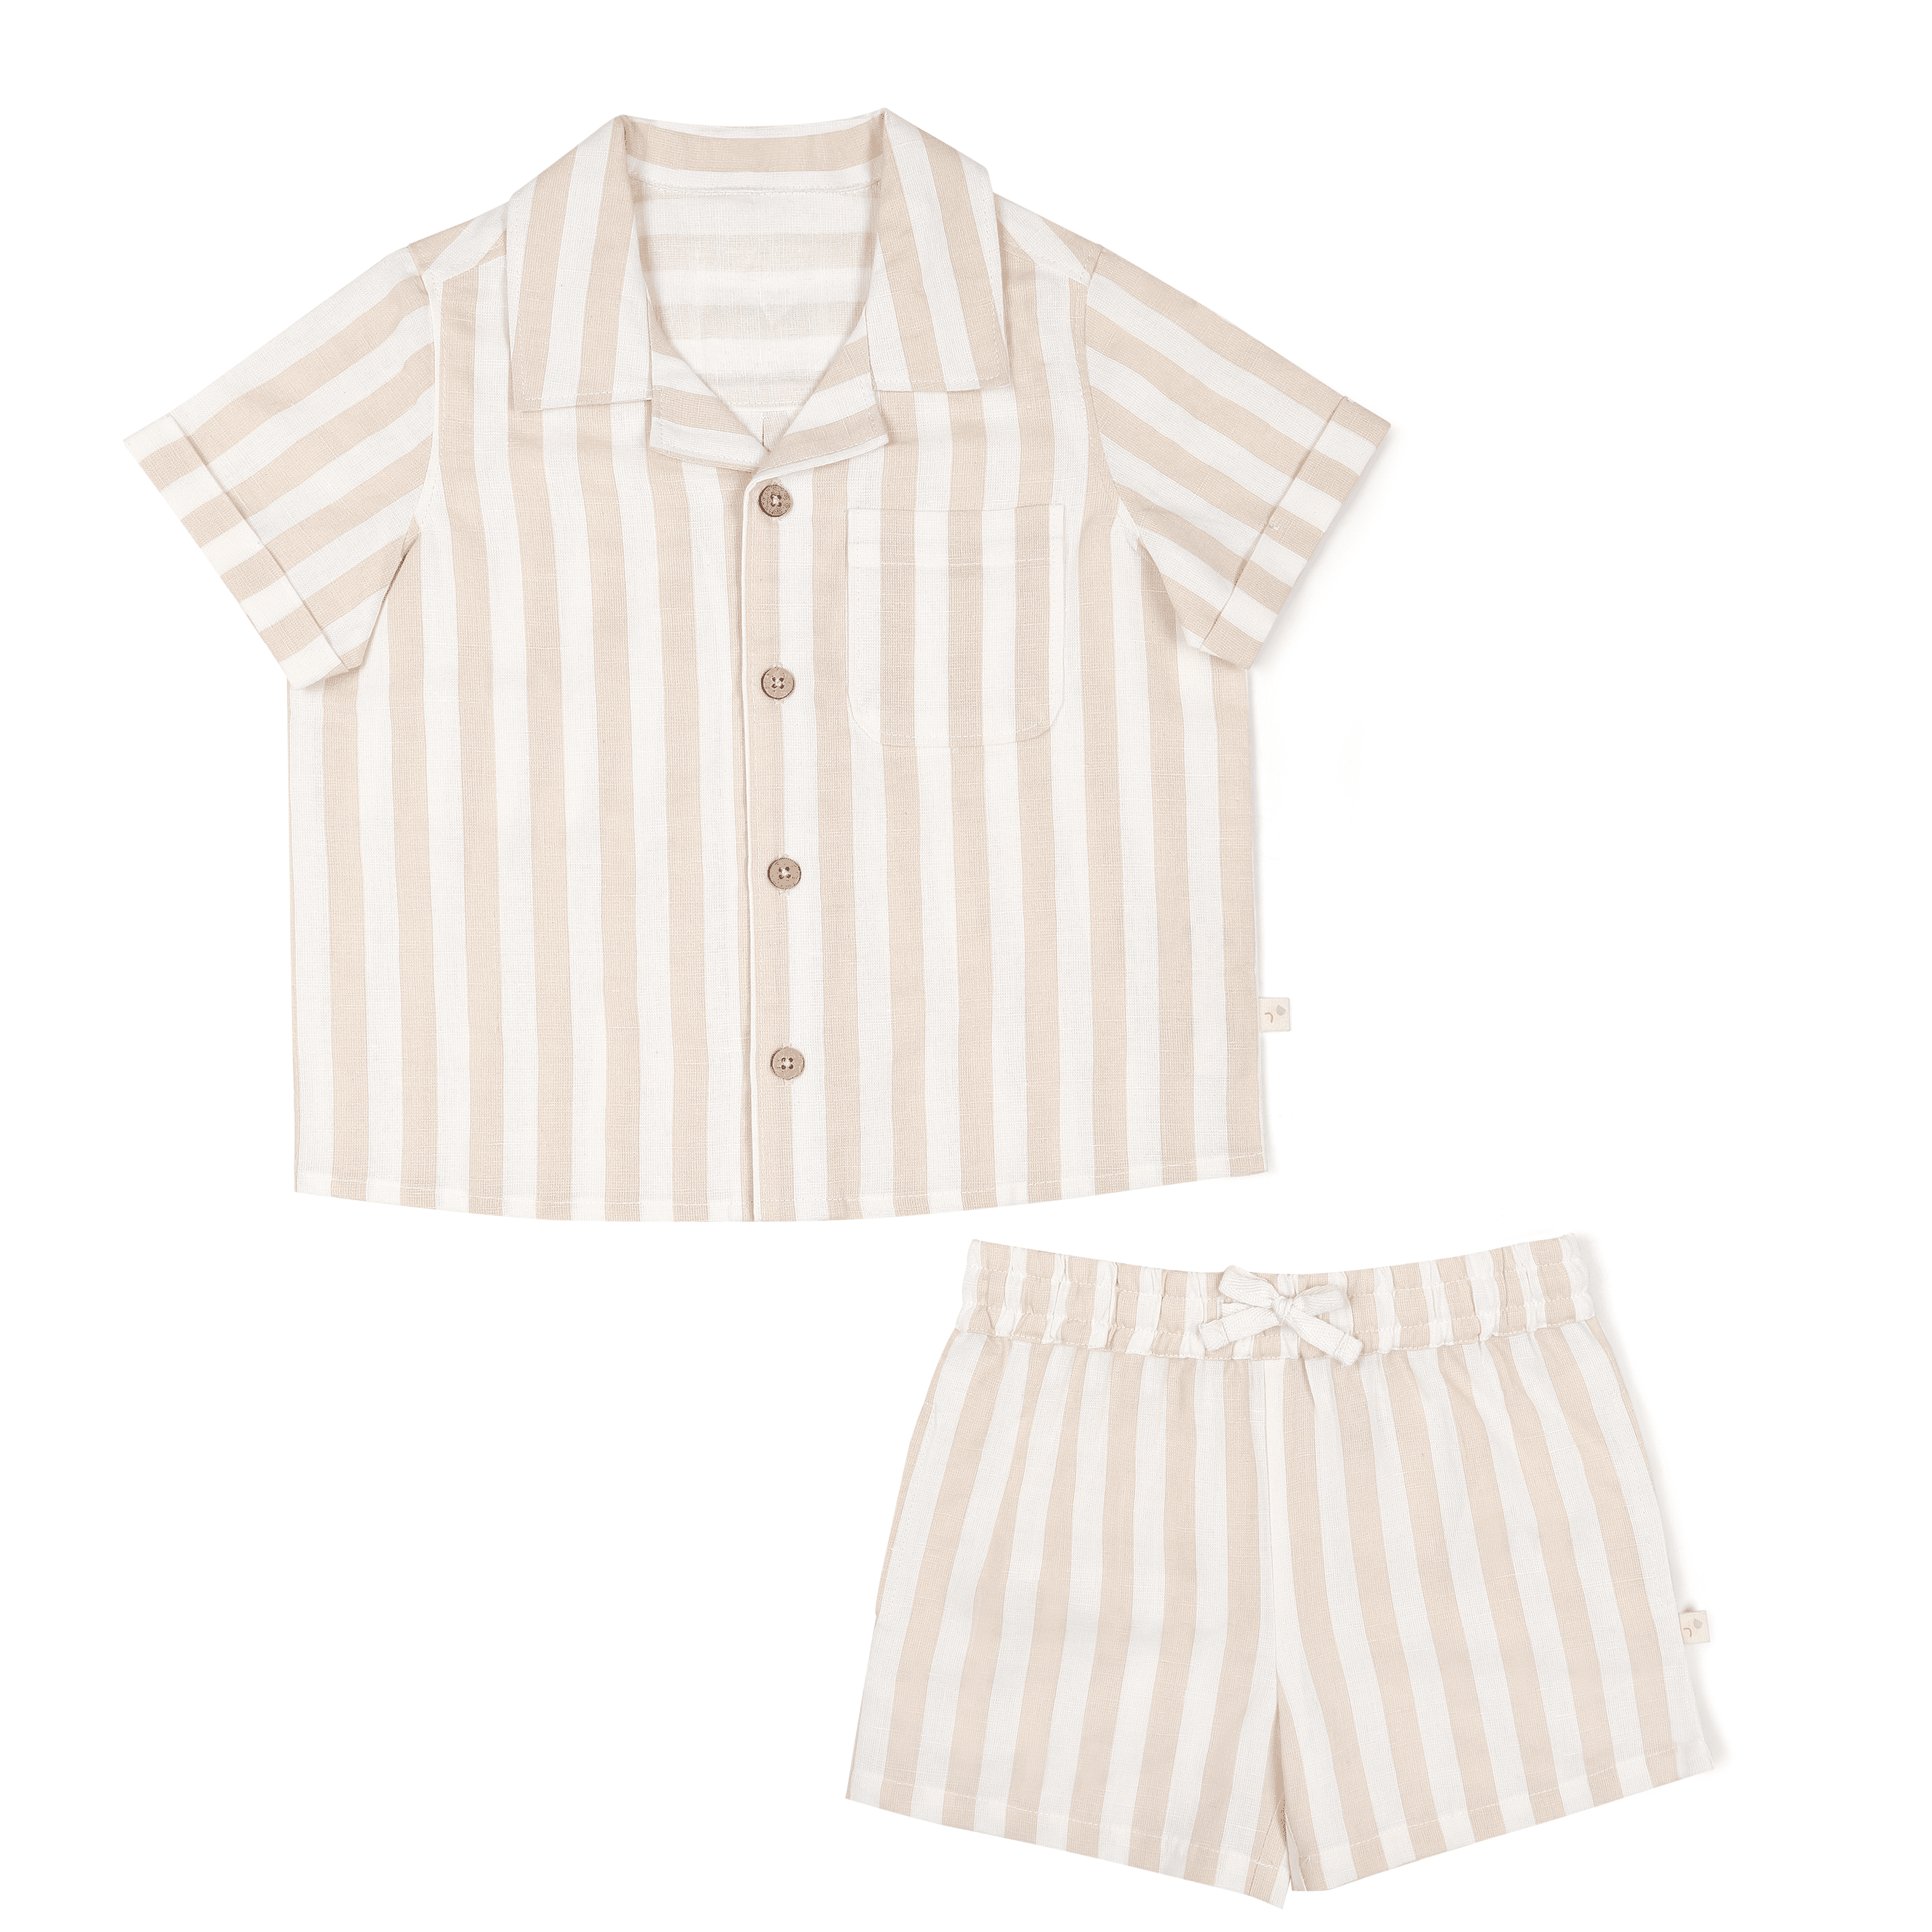 A Makemake Organics Organic Linen Shirt and Shorts Set - Beige Stripes for toddlers, displayed on a white background.